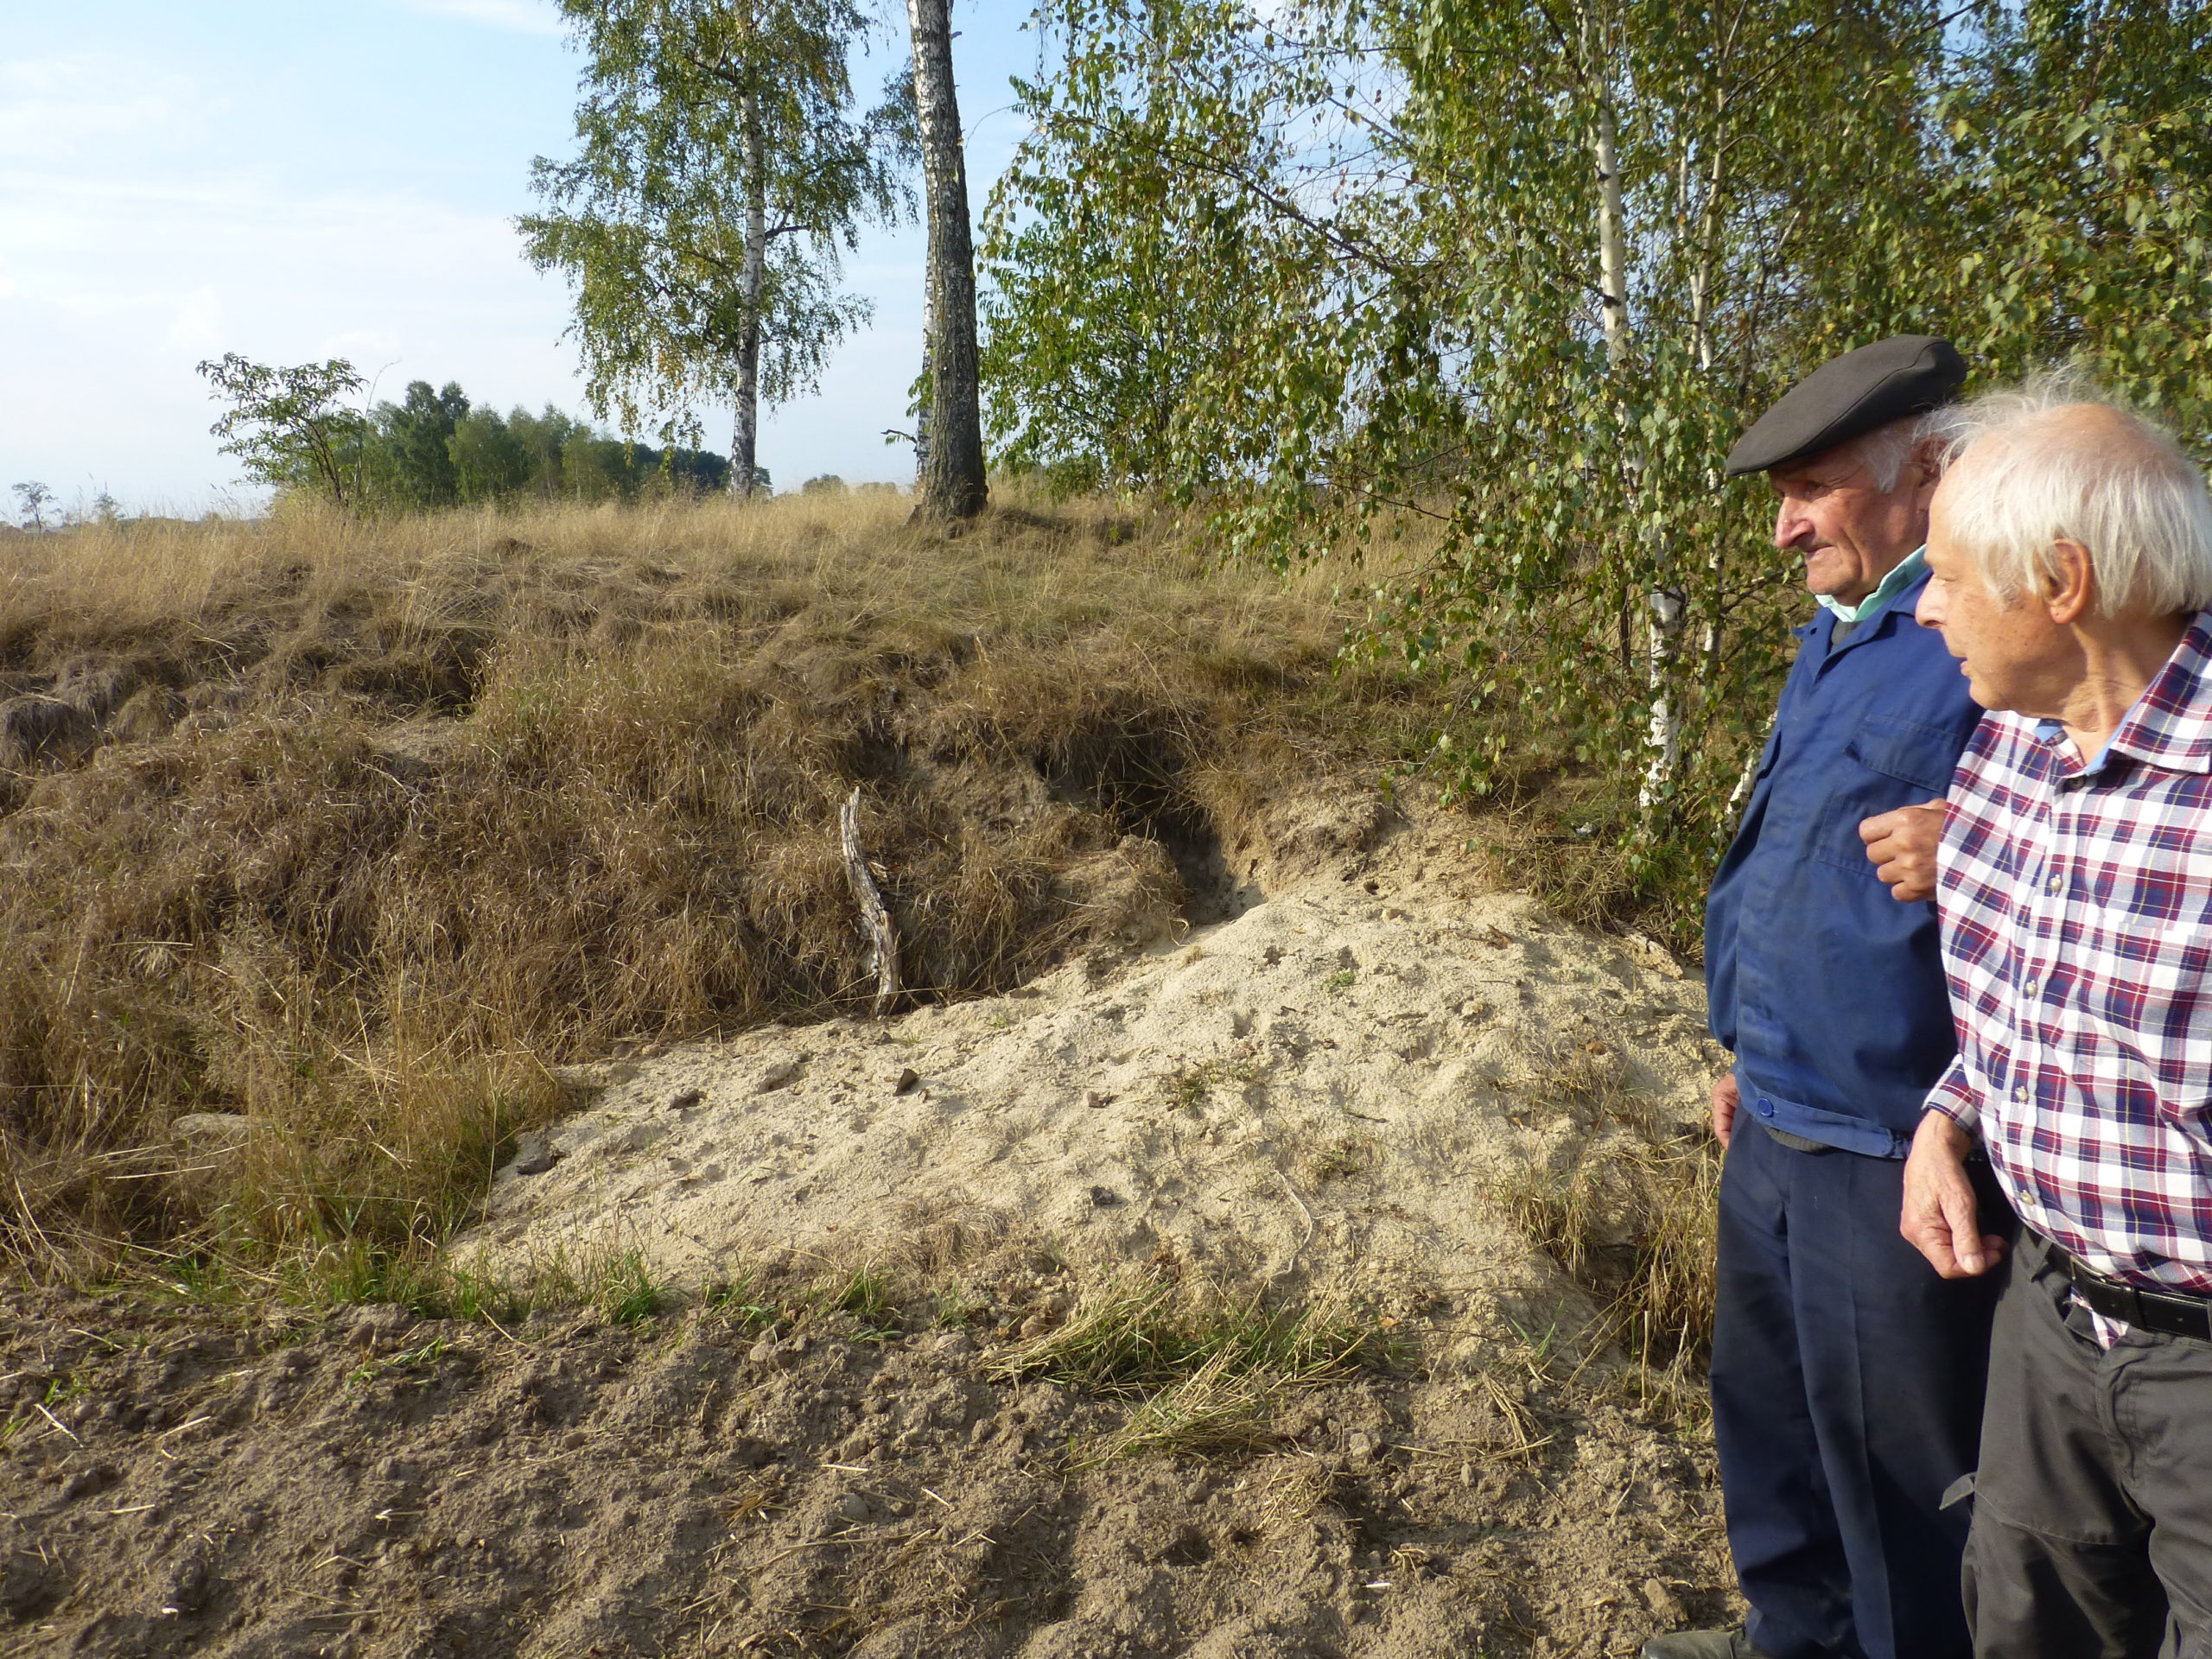 Local Polish villager Josef shows Charley Koenig where WWI German soldiers who died in a 1915 battle are buried in a field. Charley's father was horrifically wounded in the battle.